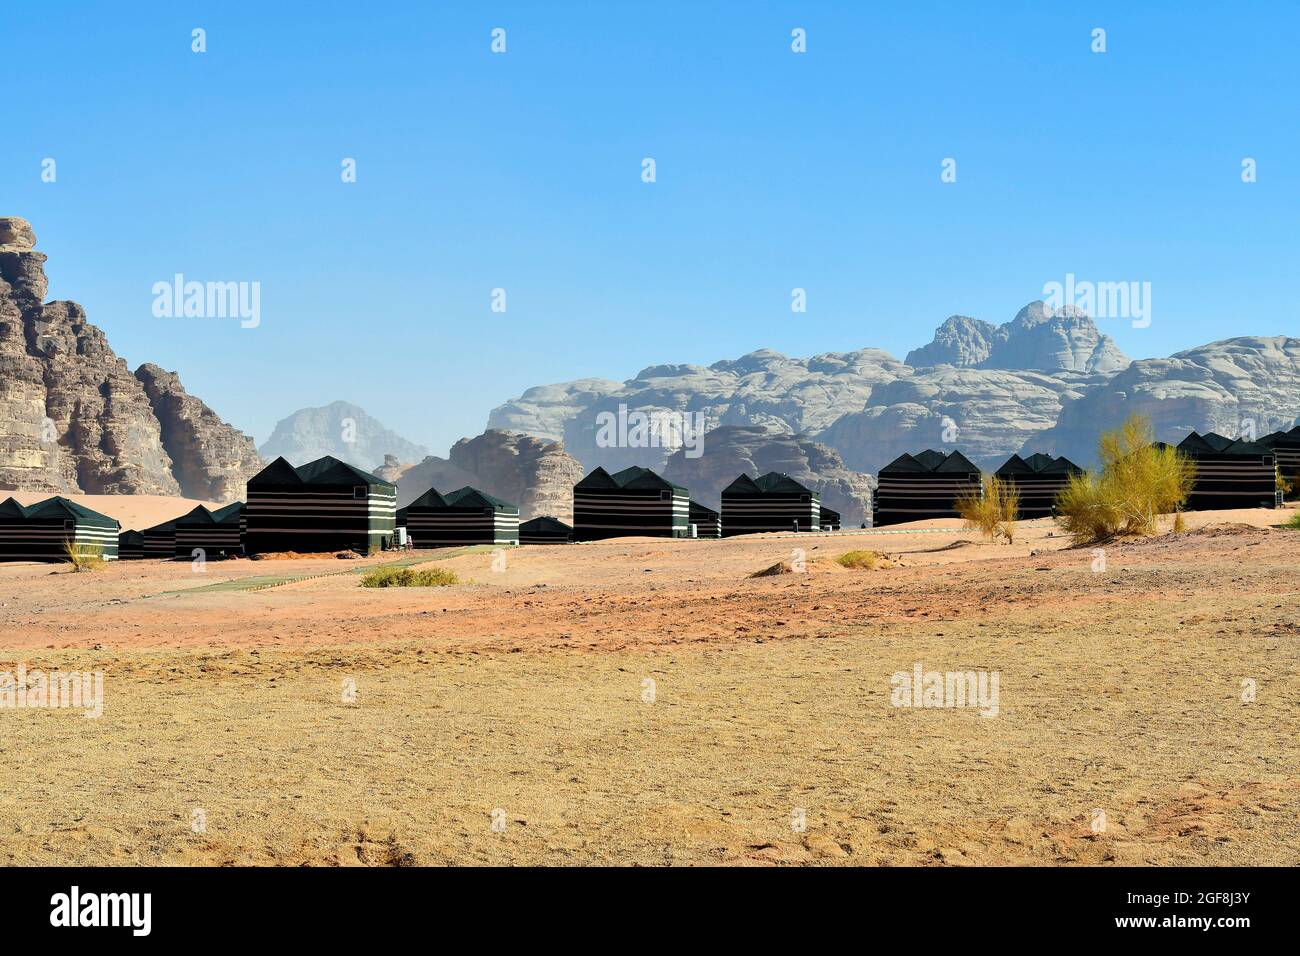 Jordan, Wadi Rum, tents of a tourist camp in the UNESCO World heritage site in Middle East Stock Photo